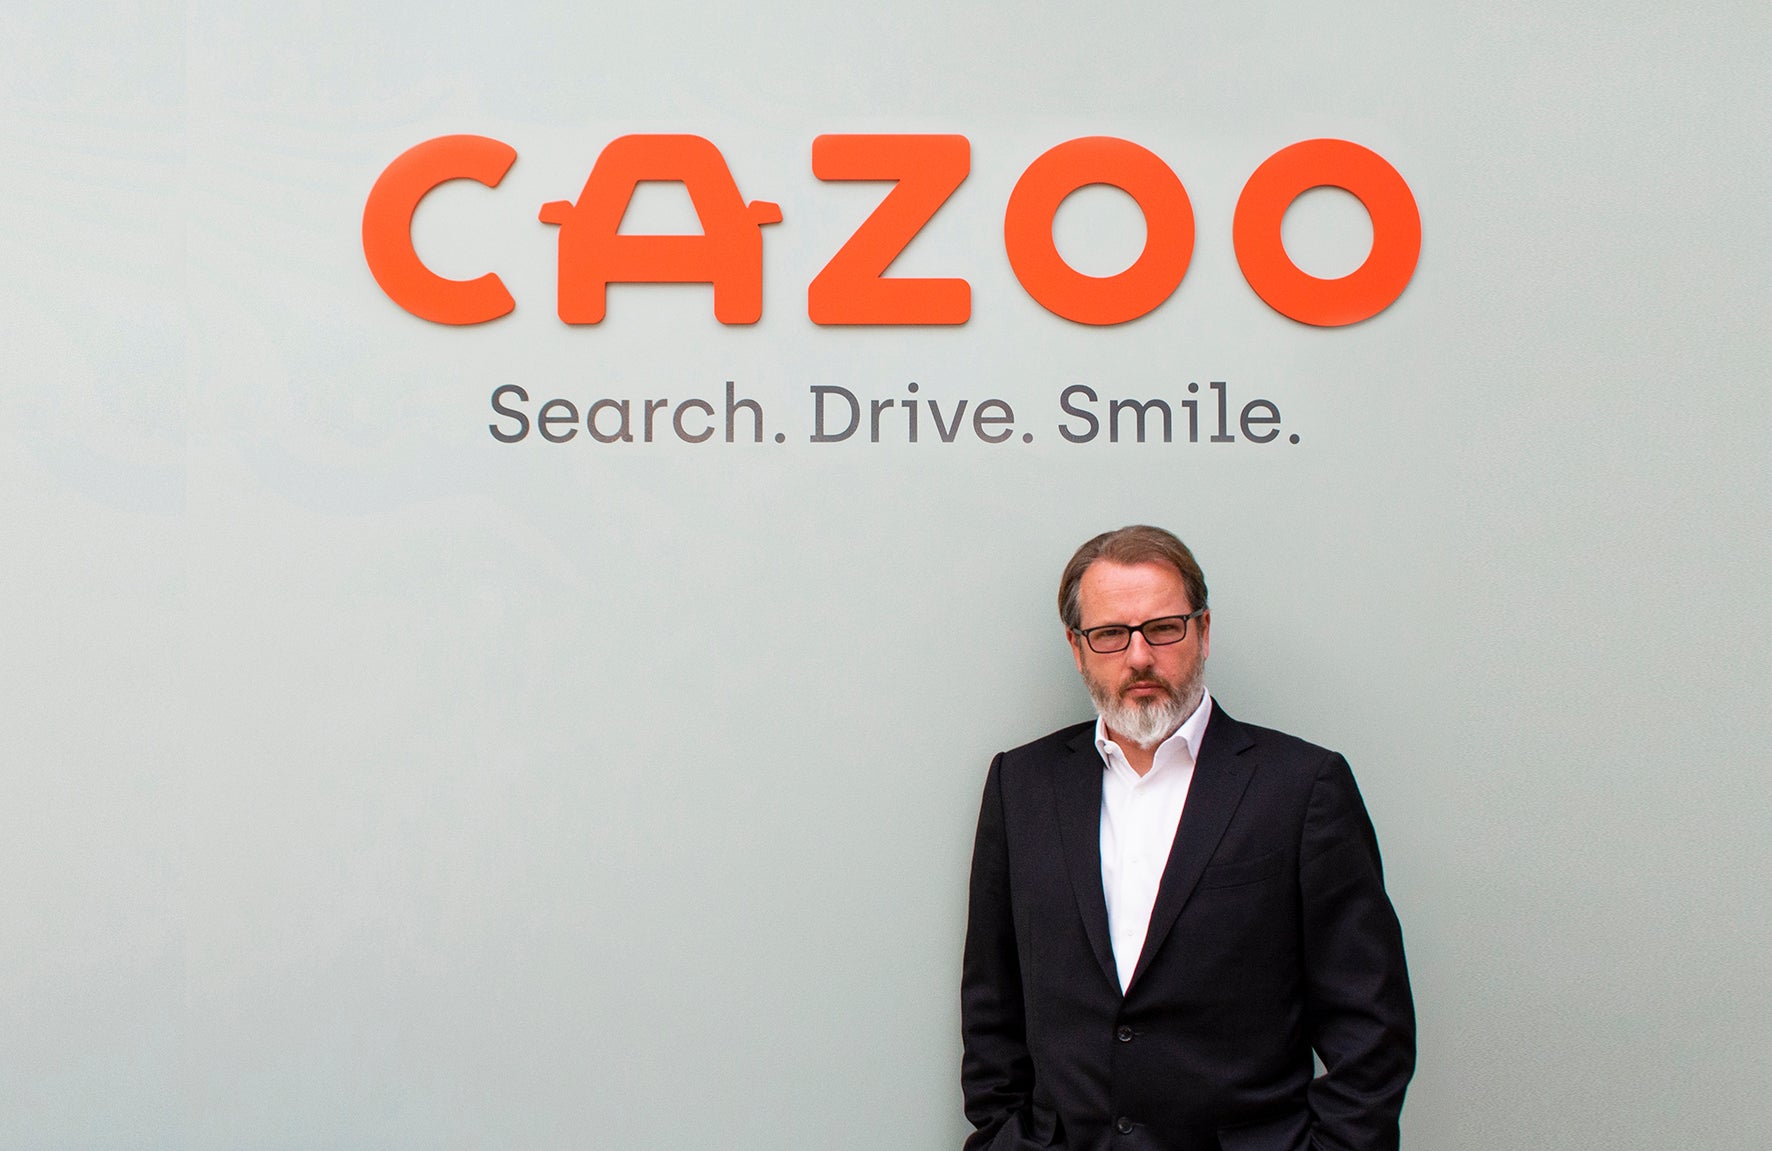 Online car retailer Cazoo has announced it will be closing down its used car markets across Europe resulting in job cuts for around 750 staff (PA)